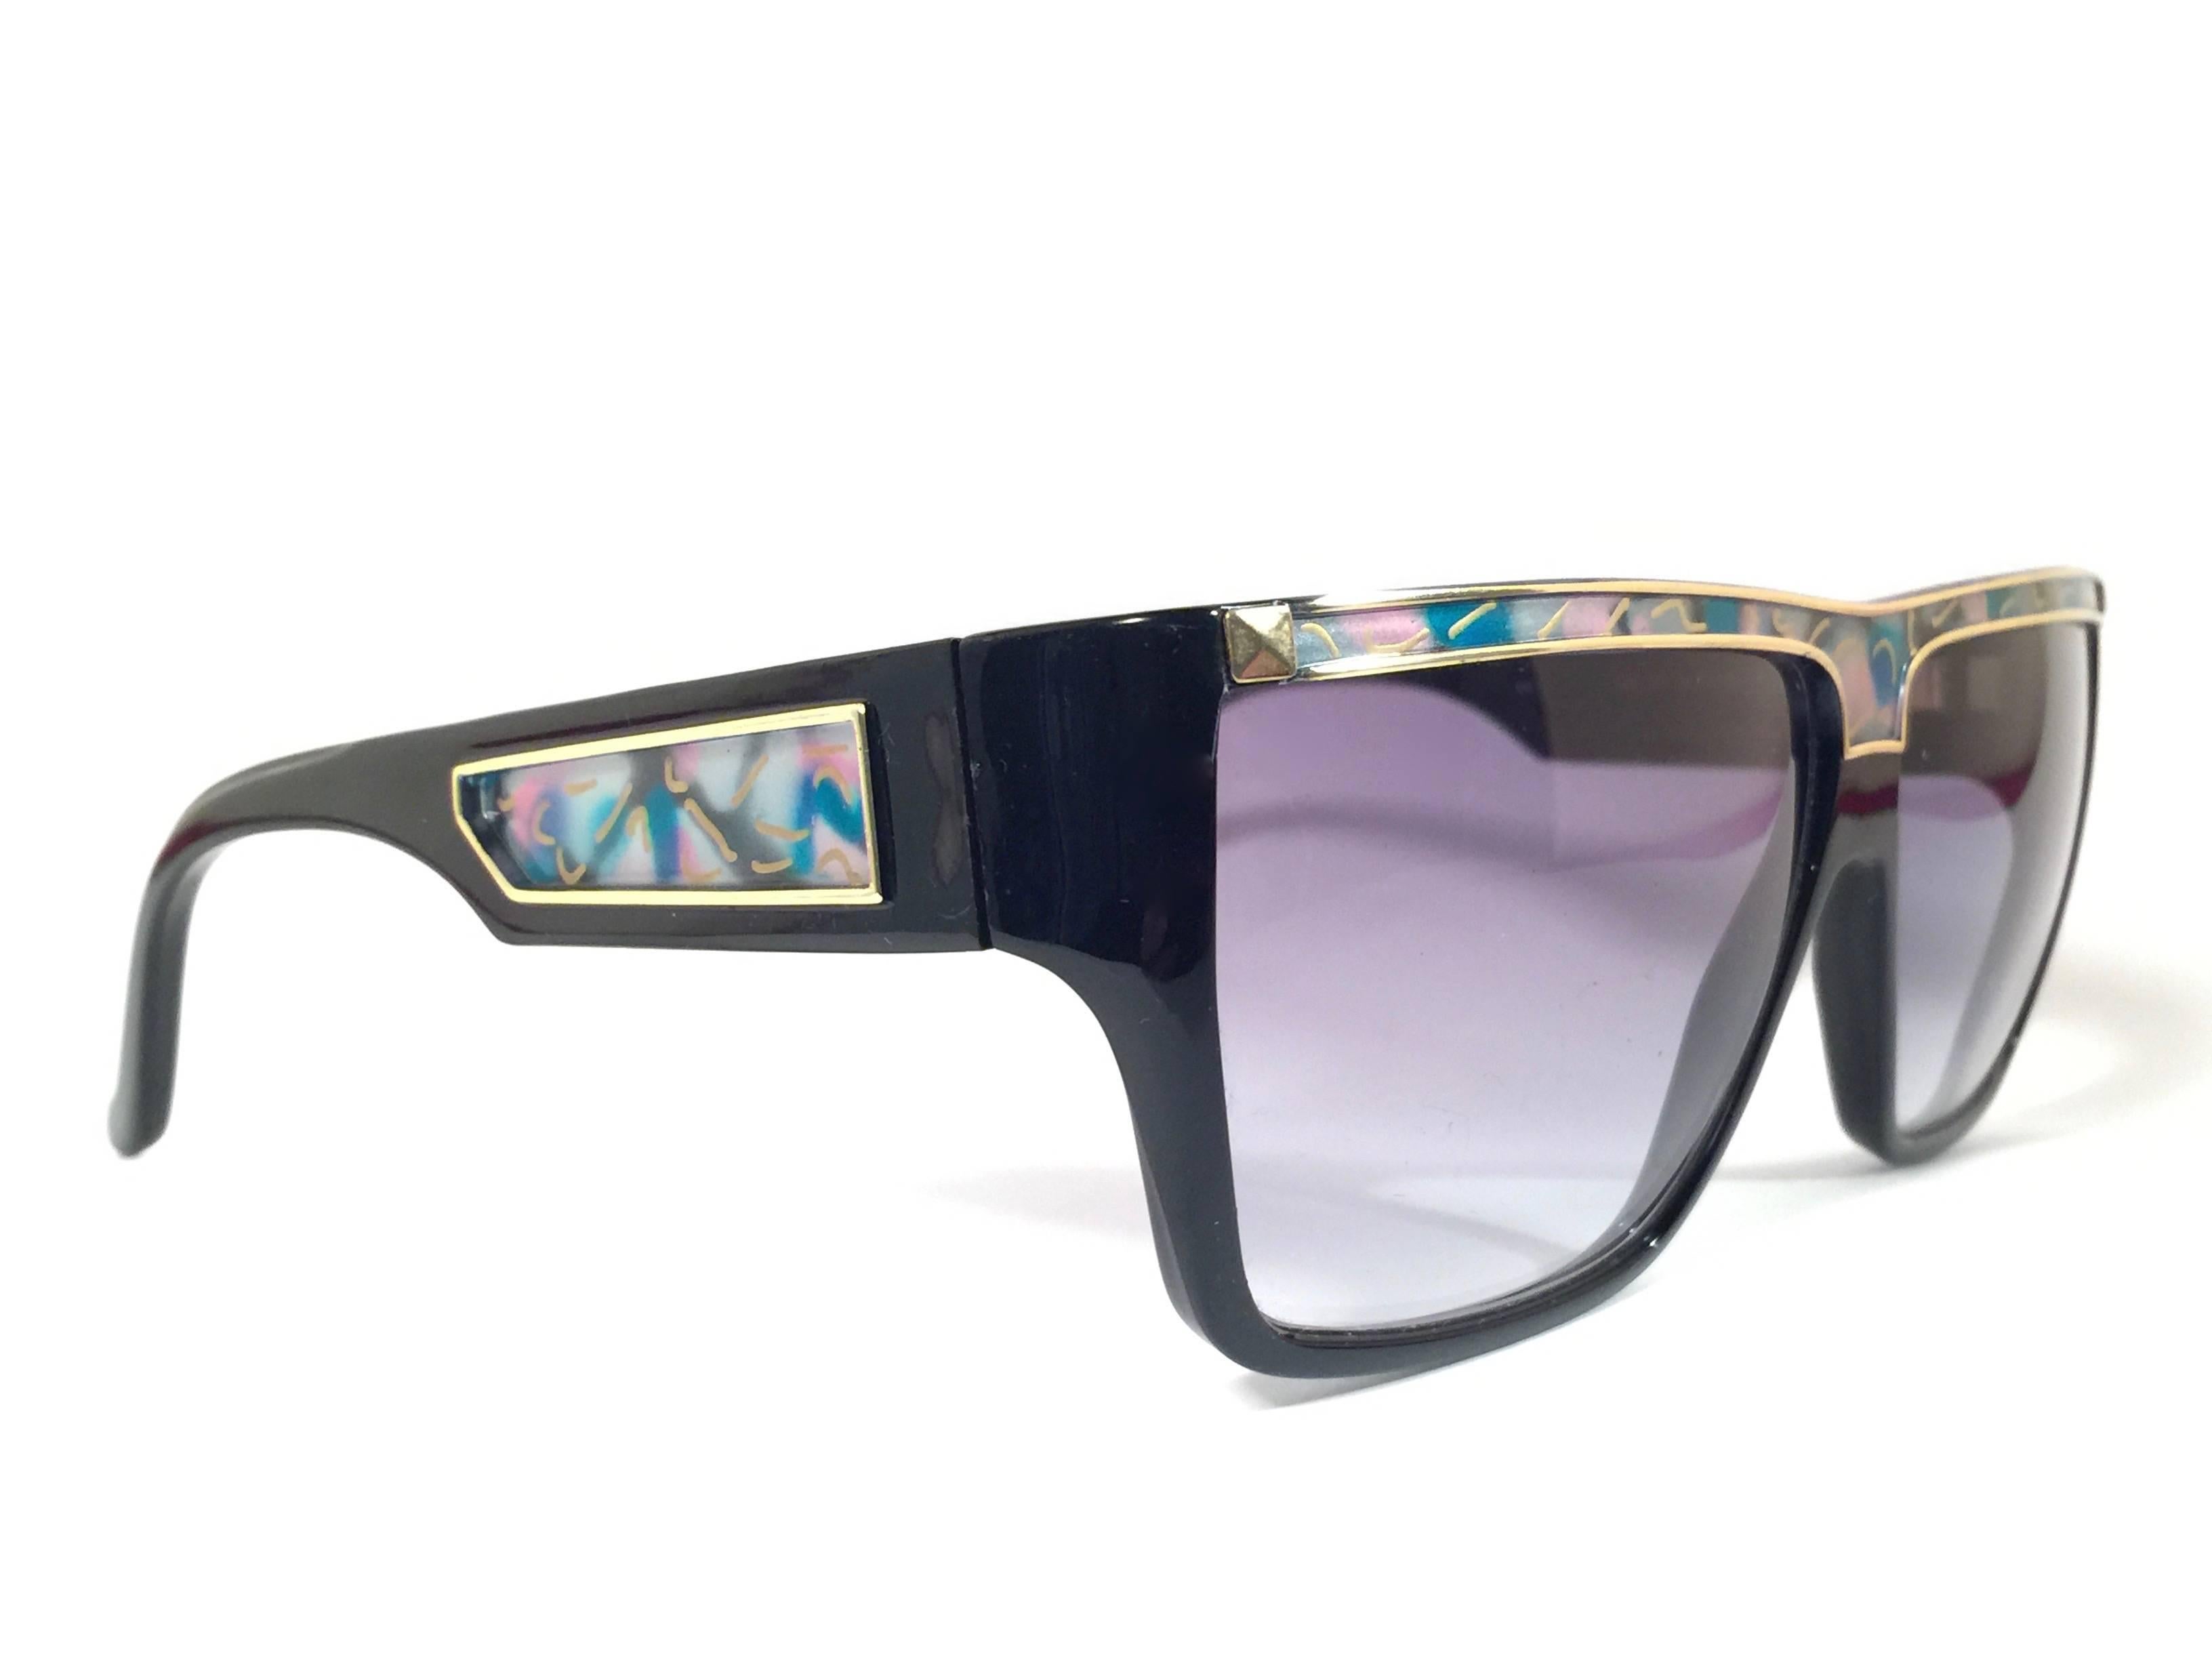 Rare pair of New vintage Leonard sunglasses. 

Black with signature colours mosaic with gold accents frame holding a pair of purple gradient lenses.

New, never worn or displayed. Made in France.
